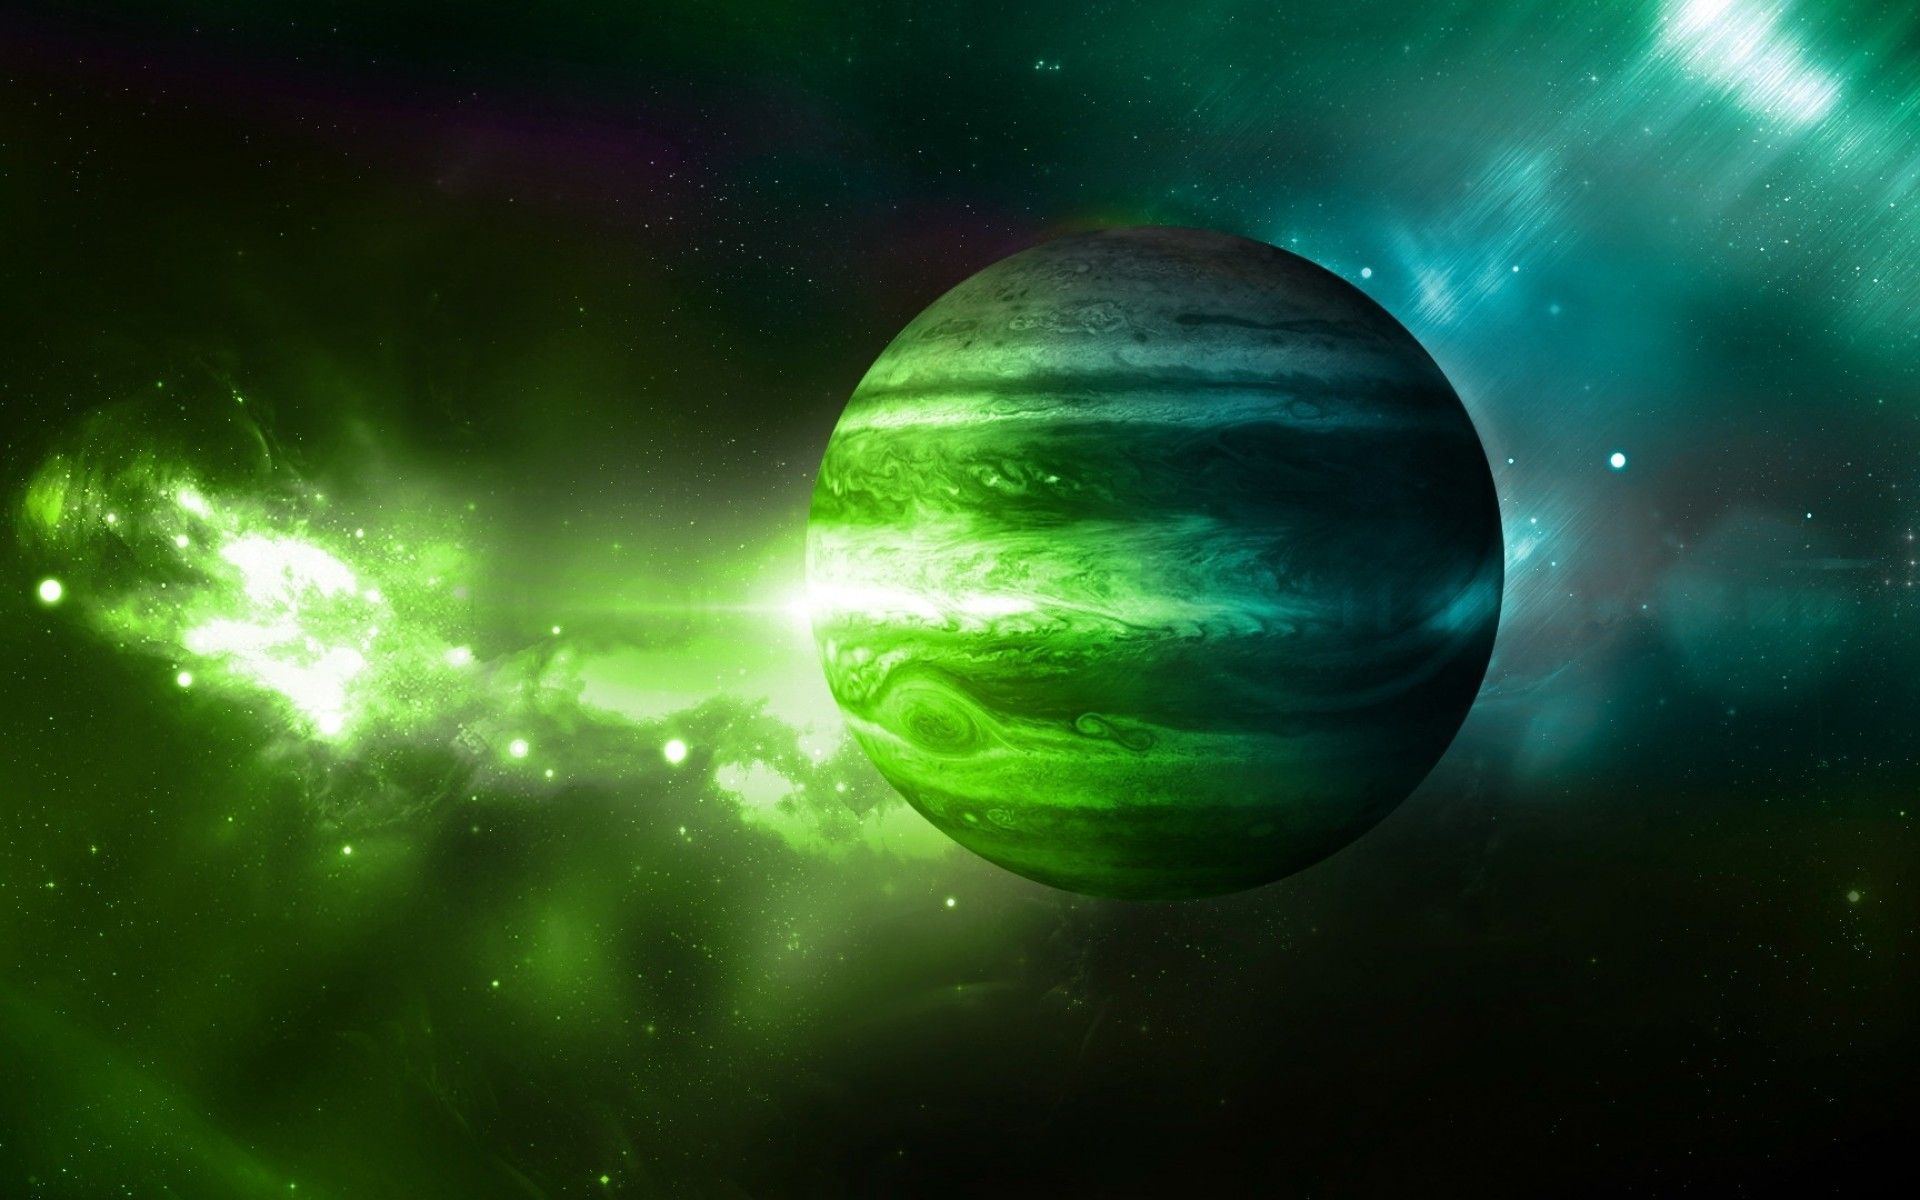 Download 1920x1200 Planet, Green Nebula, Galaxy, Outer Space Wallpaper for MacBook Pro 17 inch